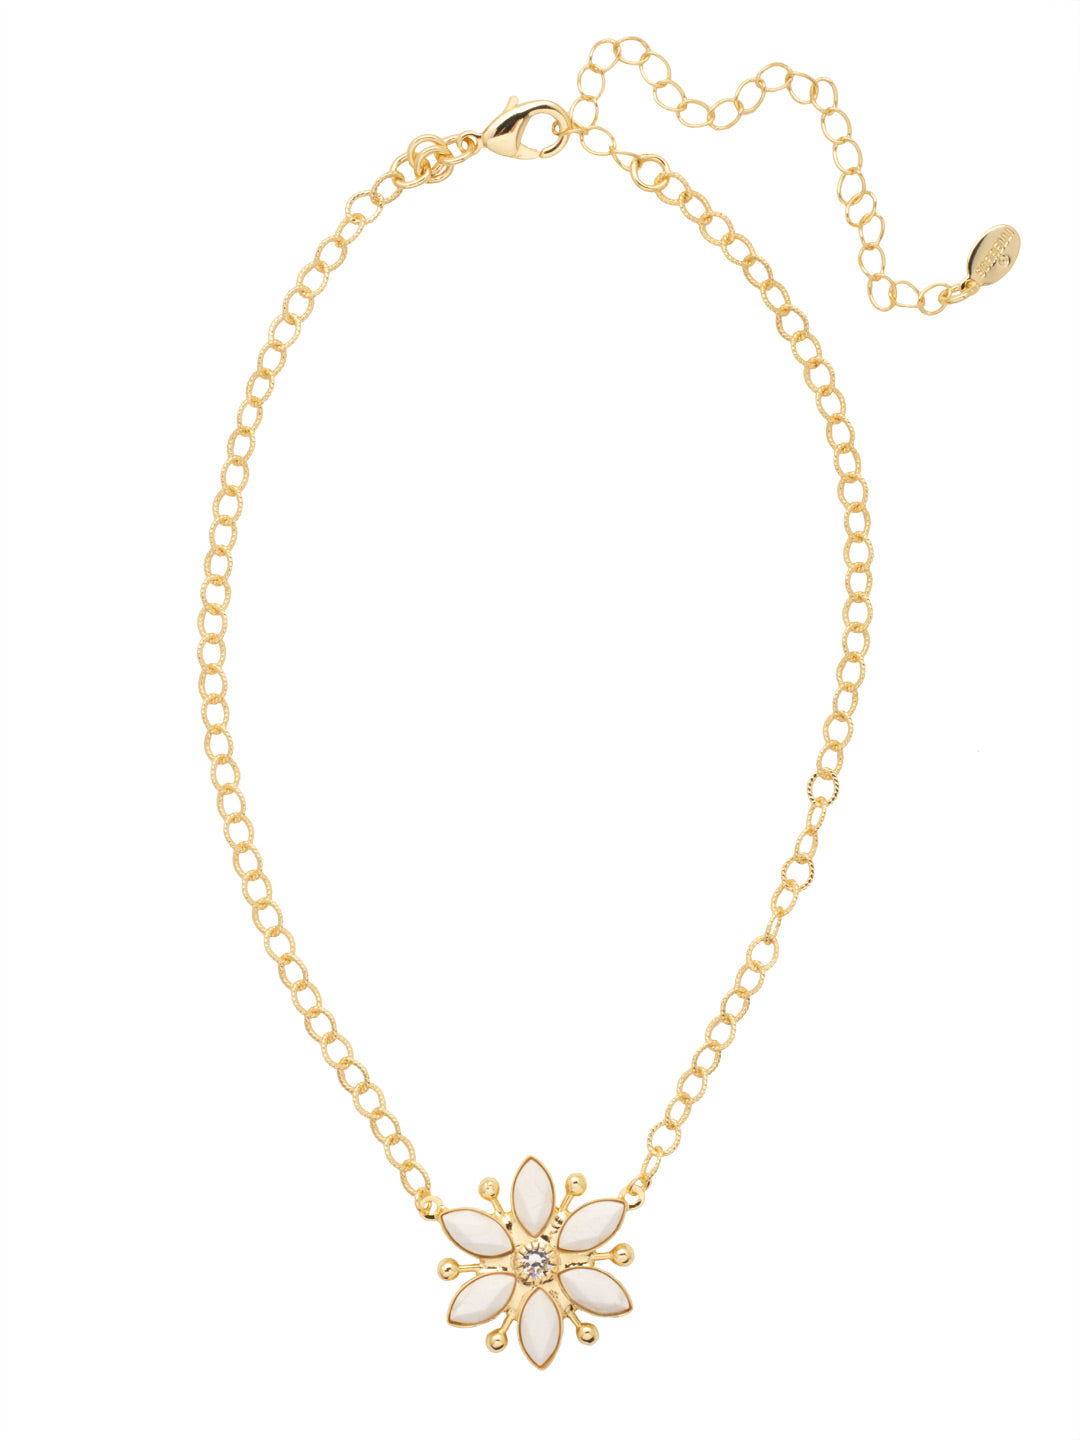 Phoebe Pendant Necklace - NEV90BGSTO - <p>Go airy and floral when you wear the Phoebe Pendant Necklace. Metallic linkwork gives way to a floral pendant crafted from sparkling navette crystals. From Sorrelli's Santorini collection in our Bright Gold-tone finish.</p>